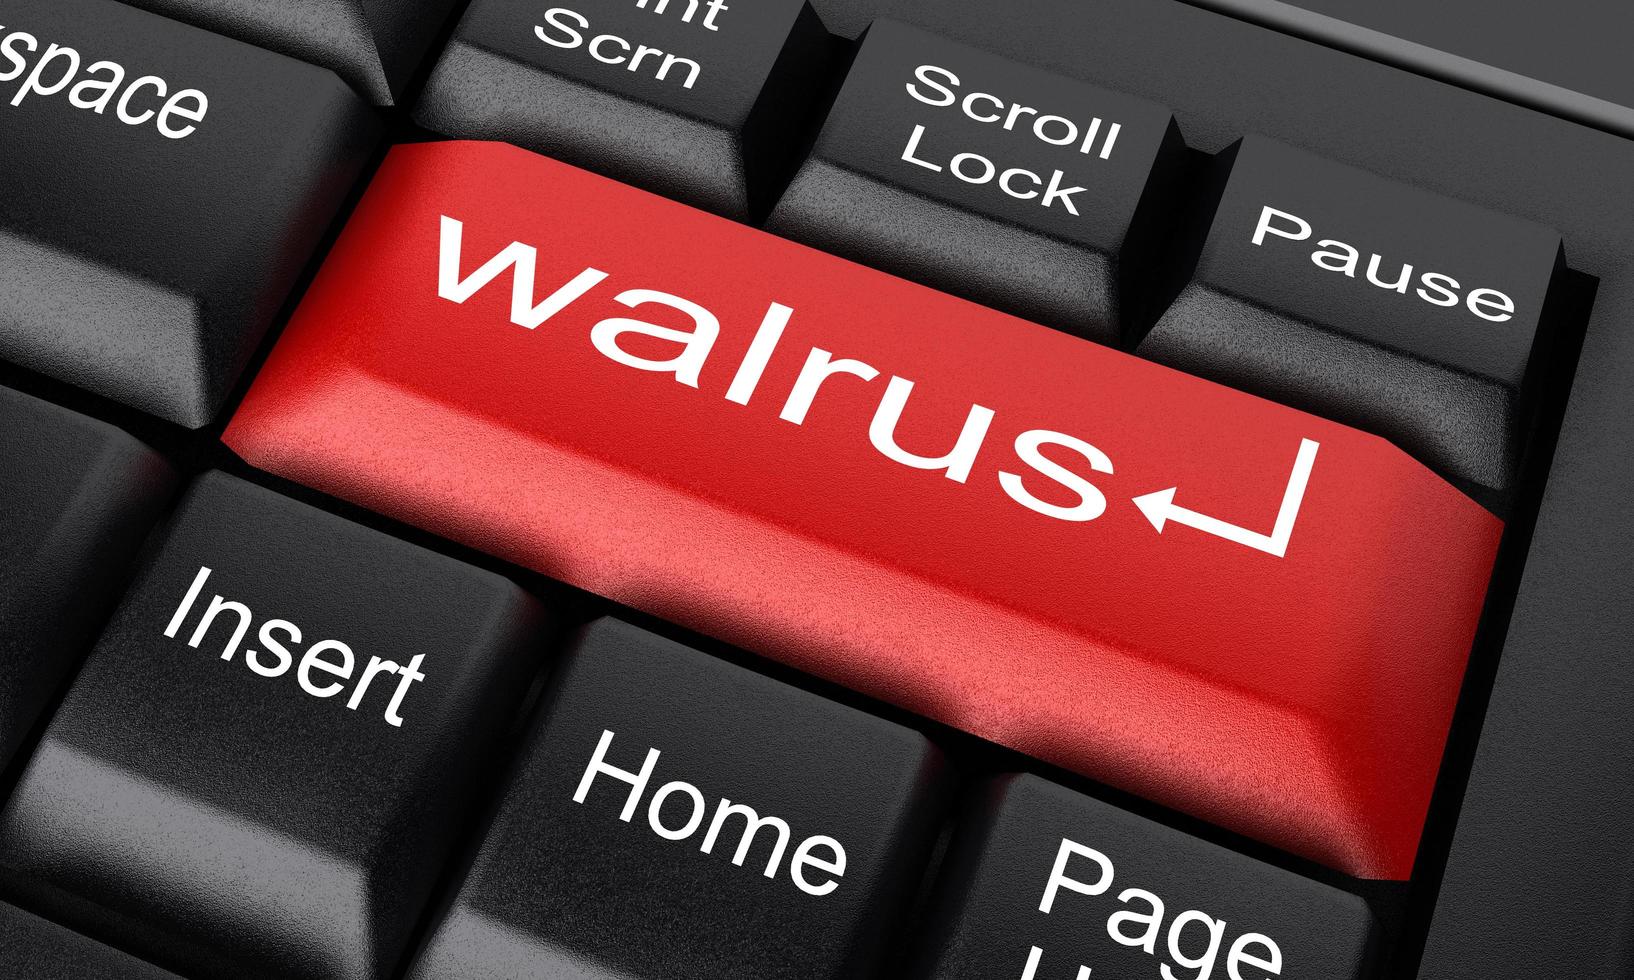 walrus word on red keyboard button photo